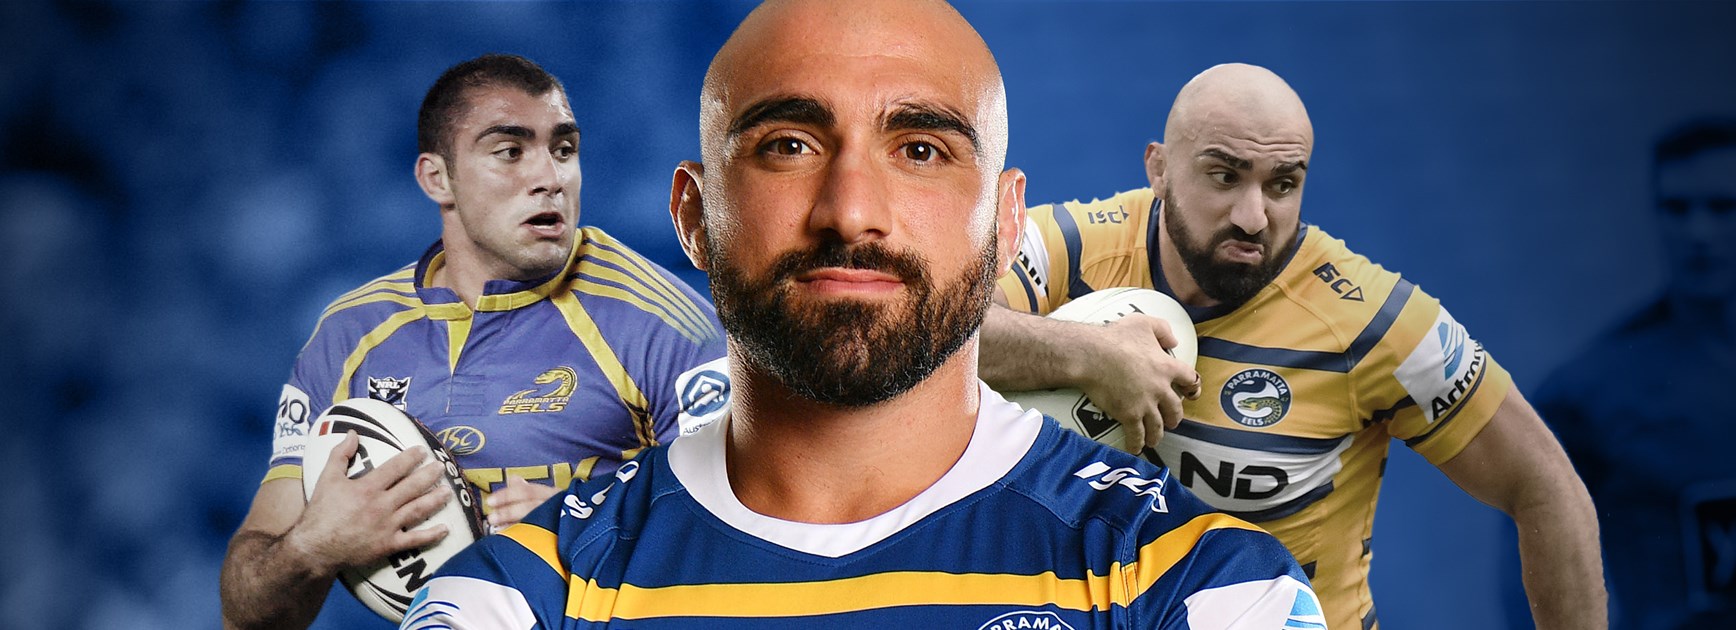 Mannah situation an unfortunate sign of the times